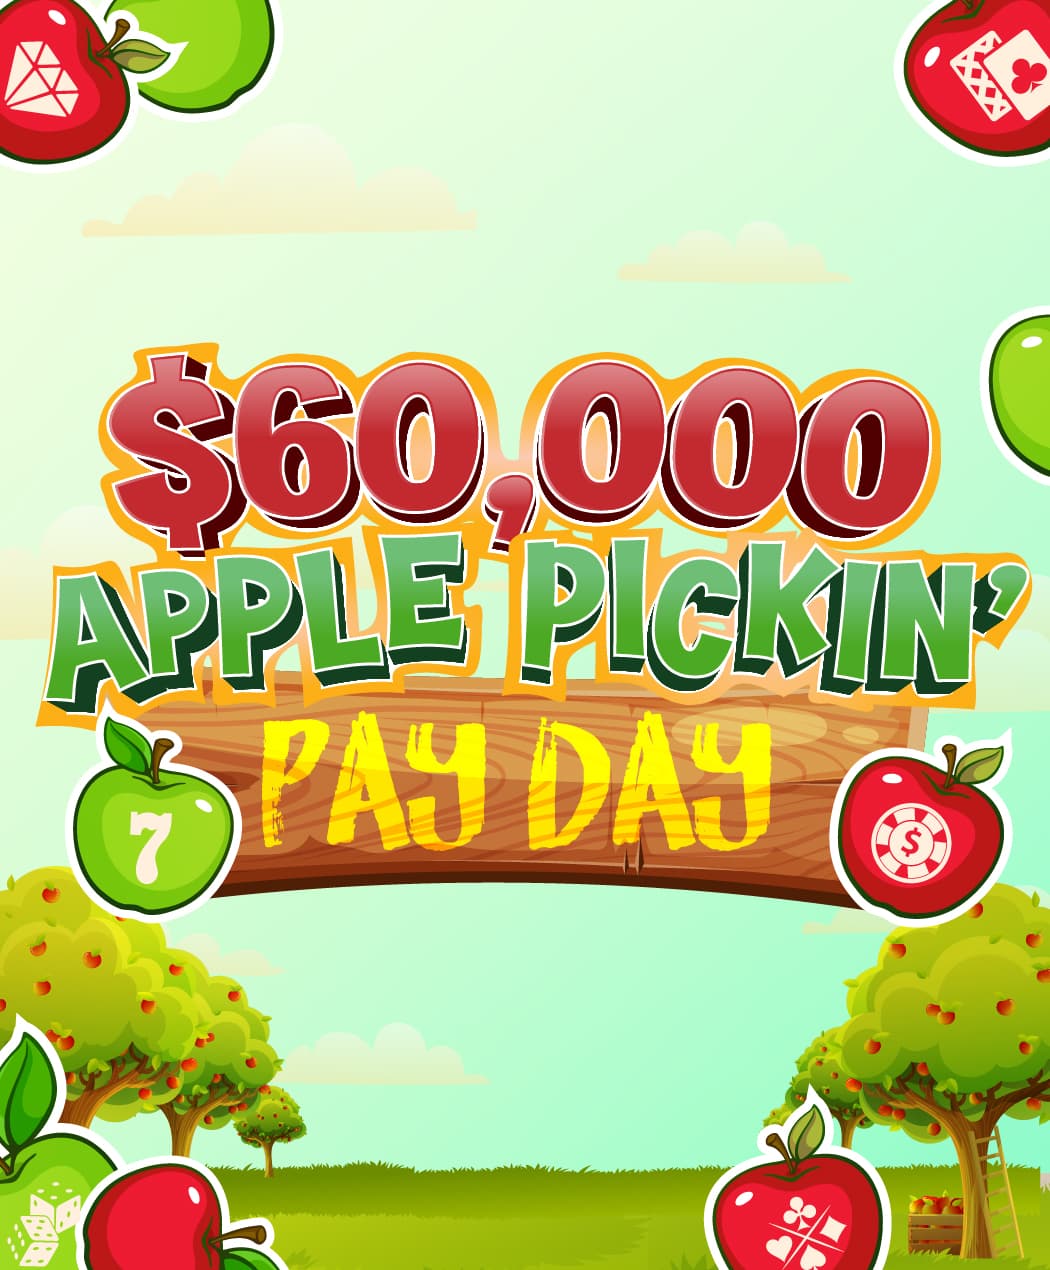 $60,000 Apple Pickin' Pay Day